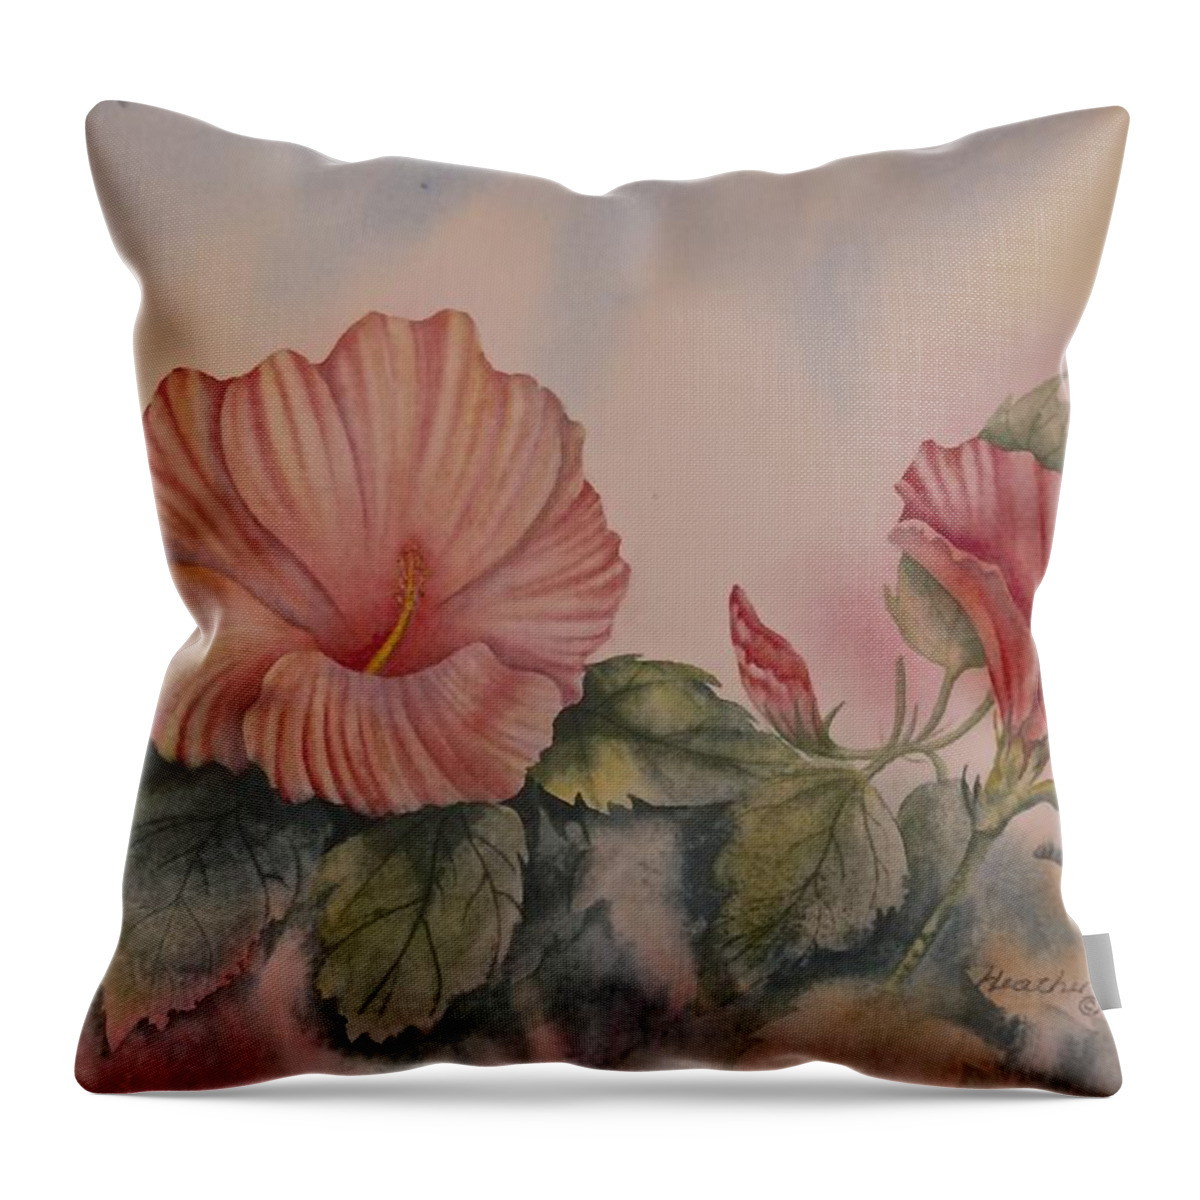 Hibiscus Throw Pillow featuring the painting Hibiscus by Heather Gallup